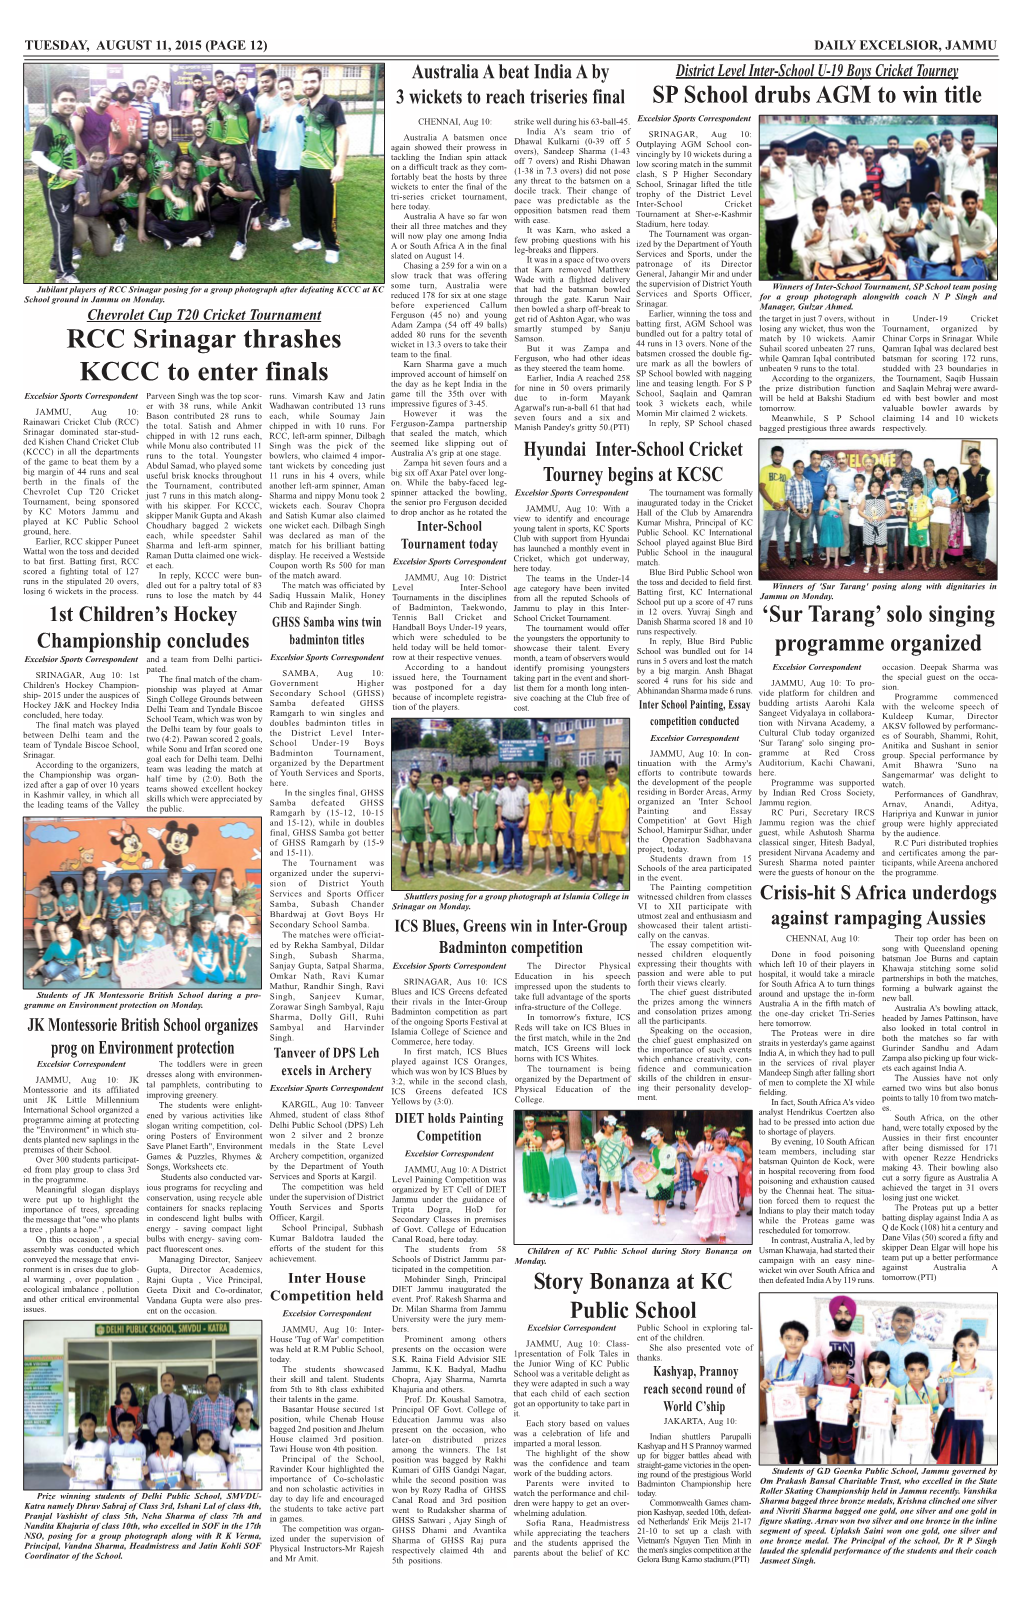 Page12 Sport.Qxd (Page 1)